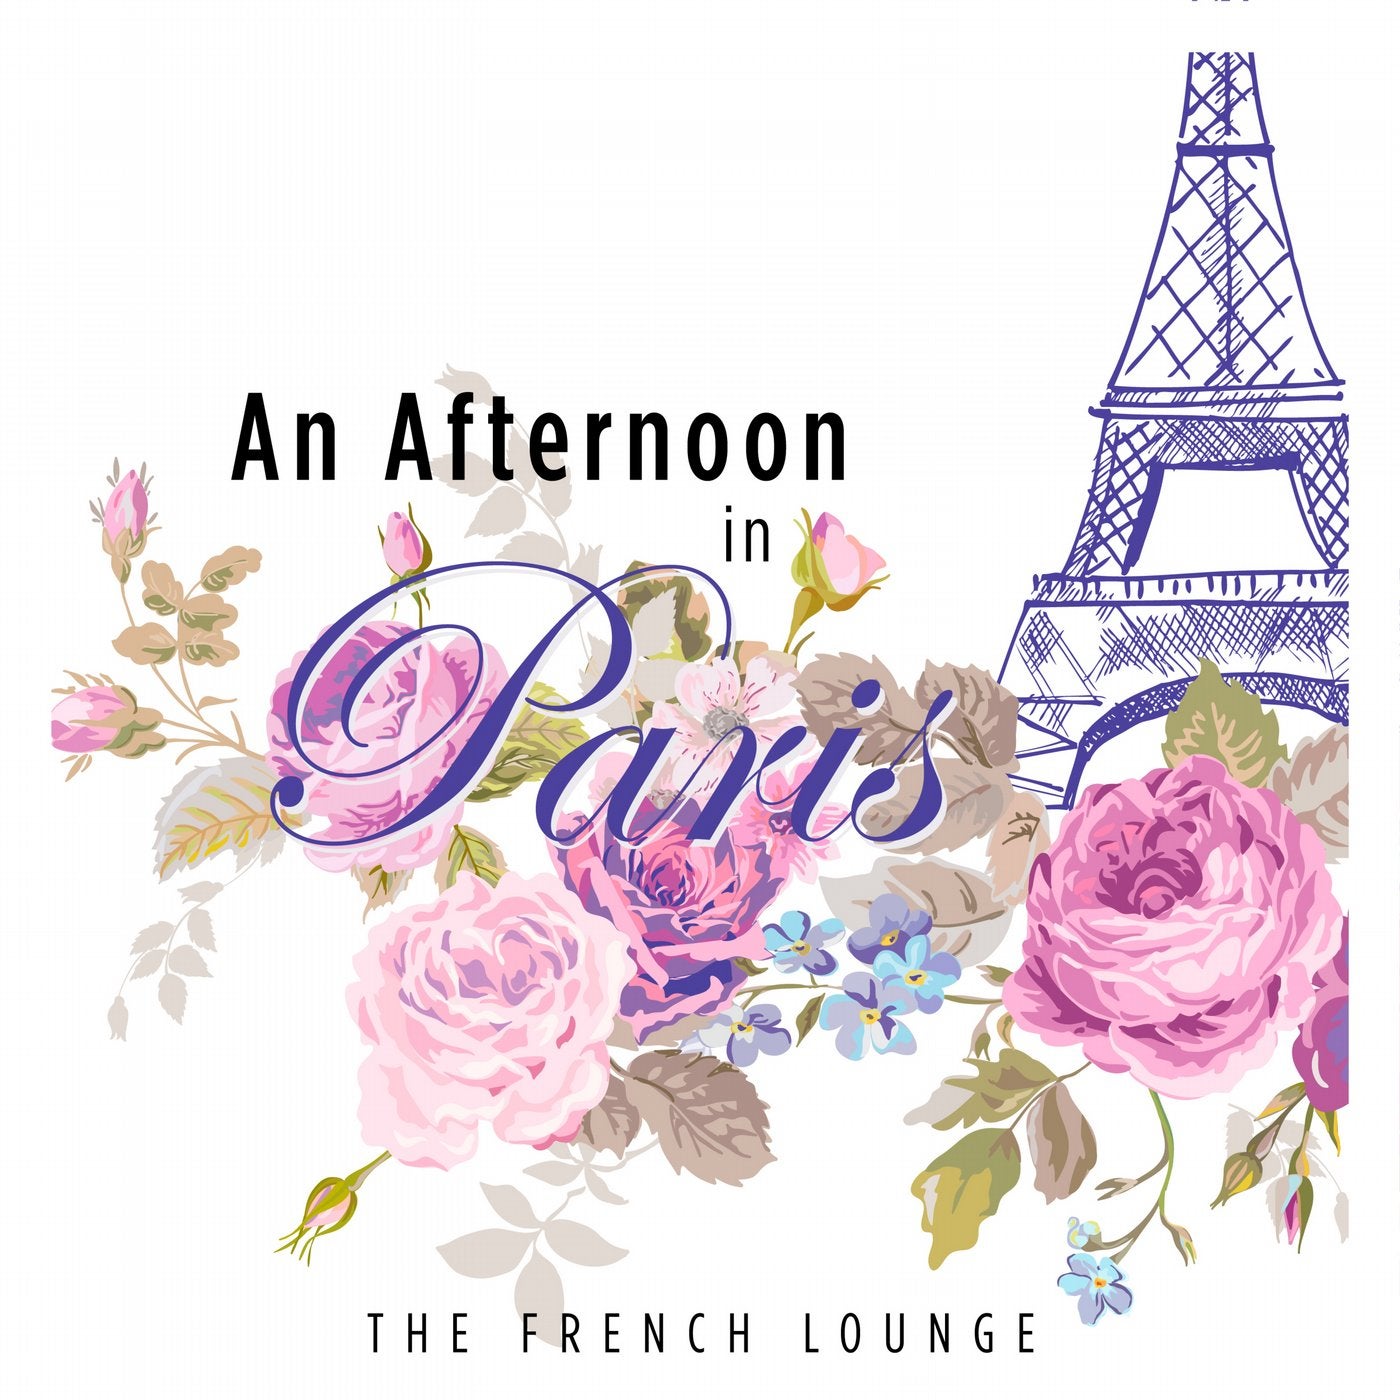 An afternoon out. Париж аудирование. Французский Lounge. Afternoon in Paris Ноты. The Paris sisters.